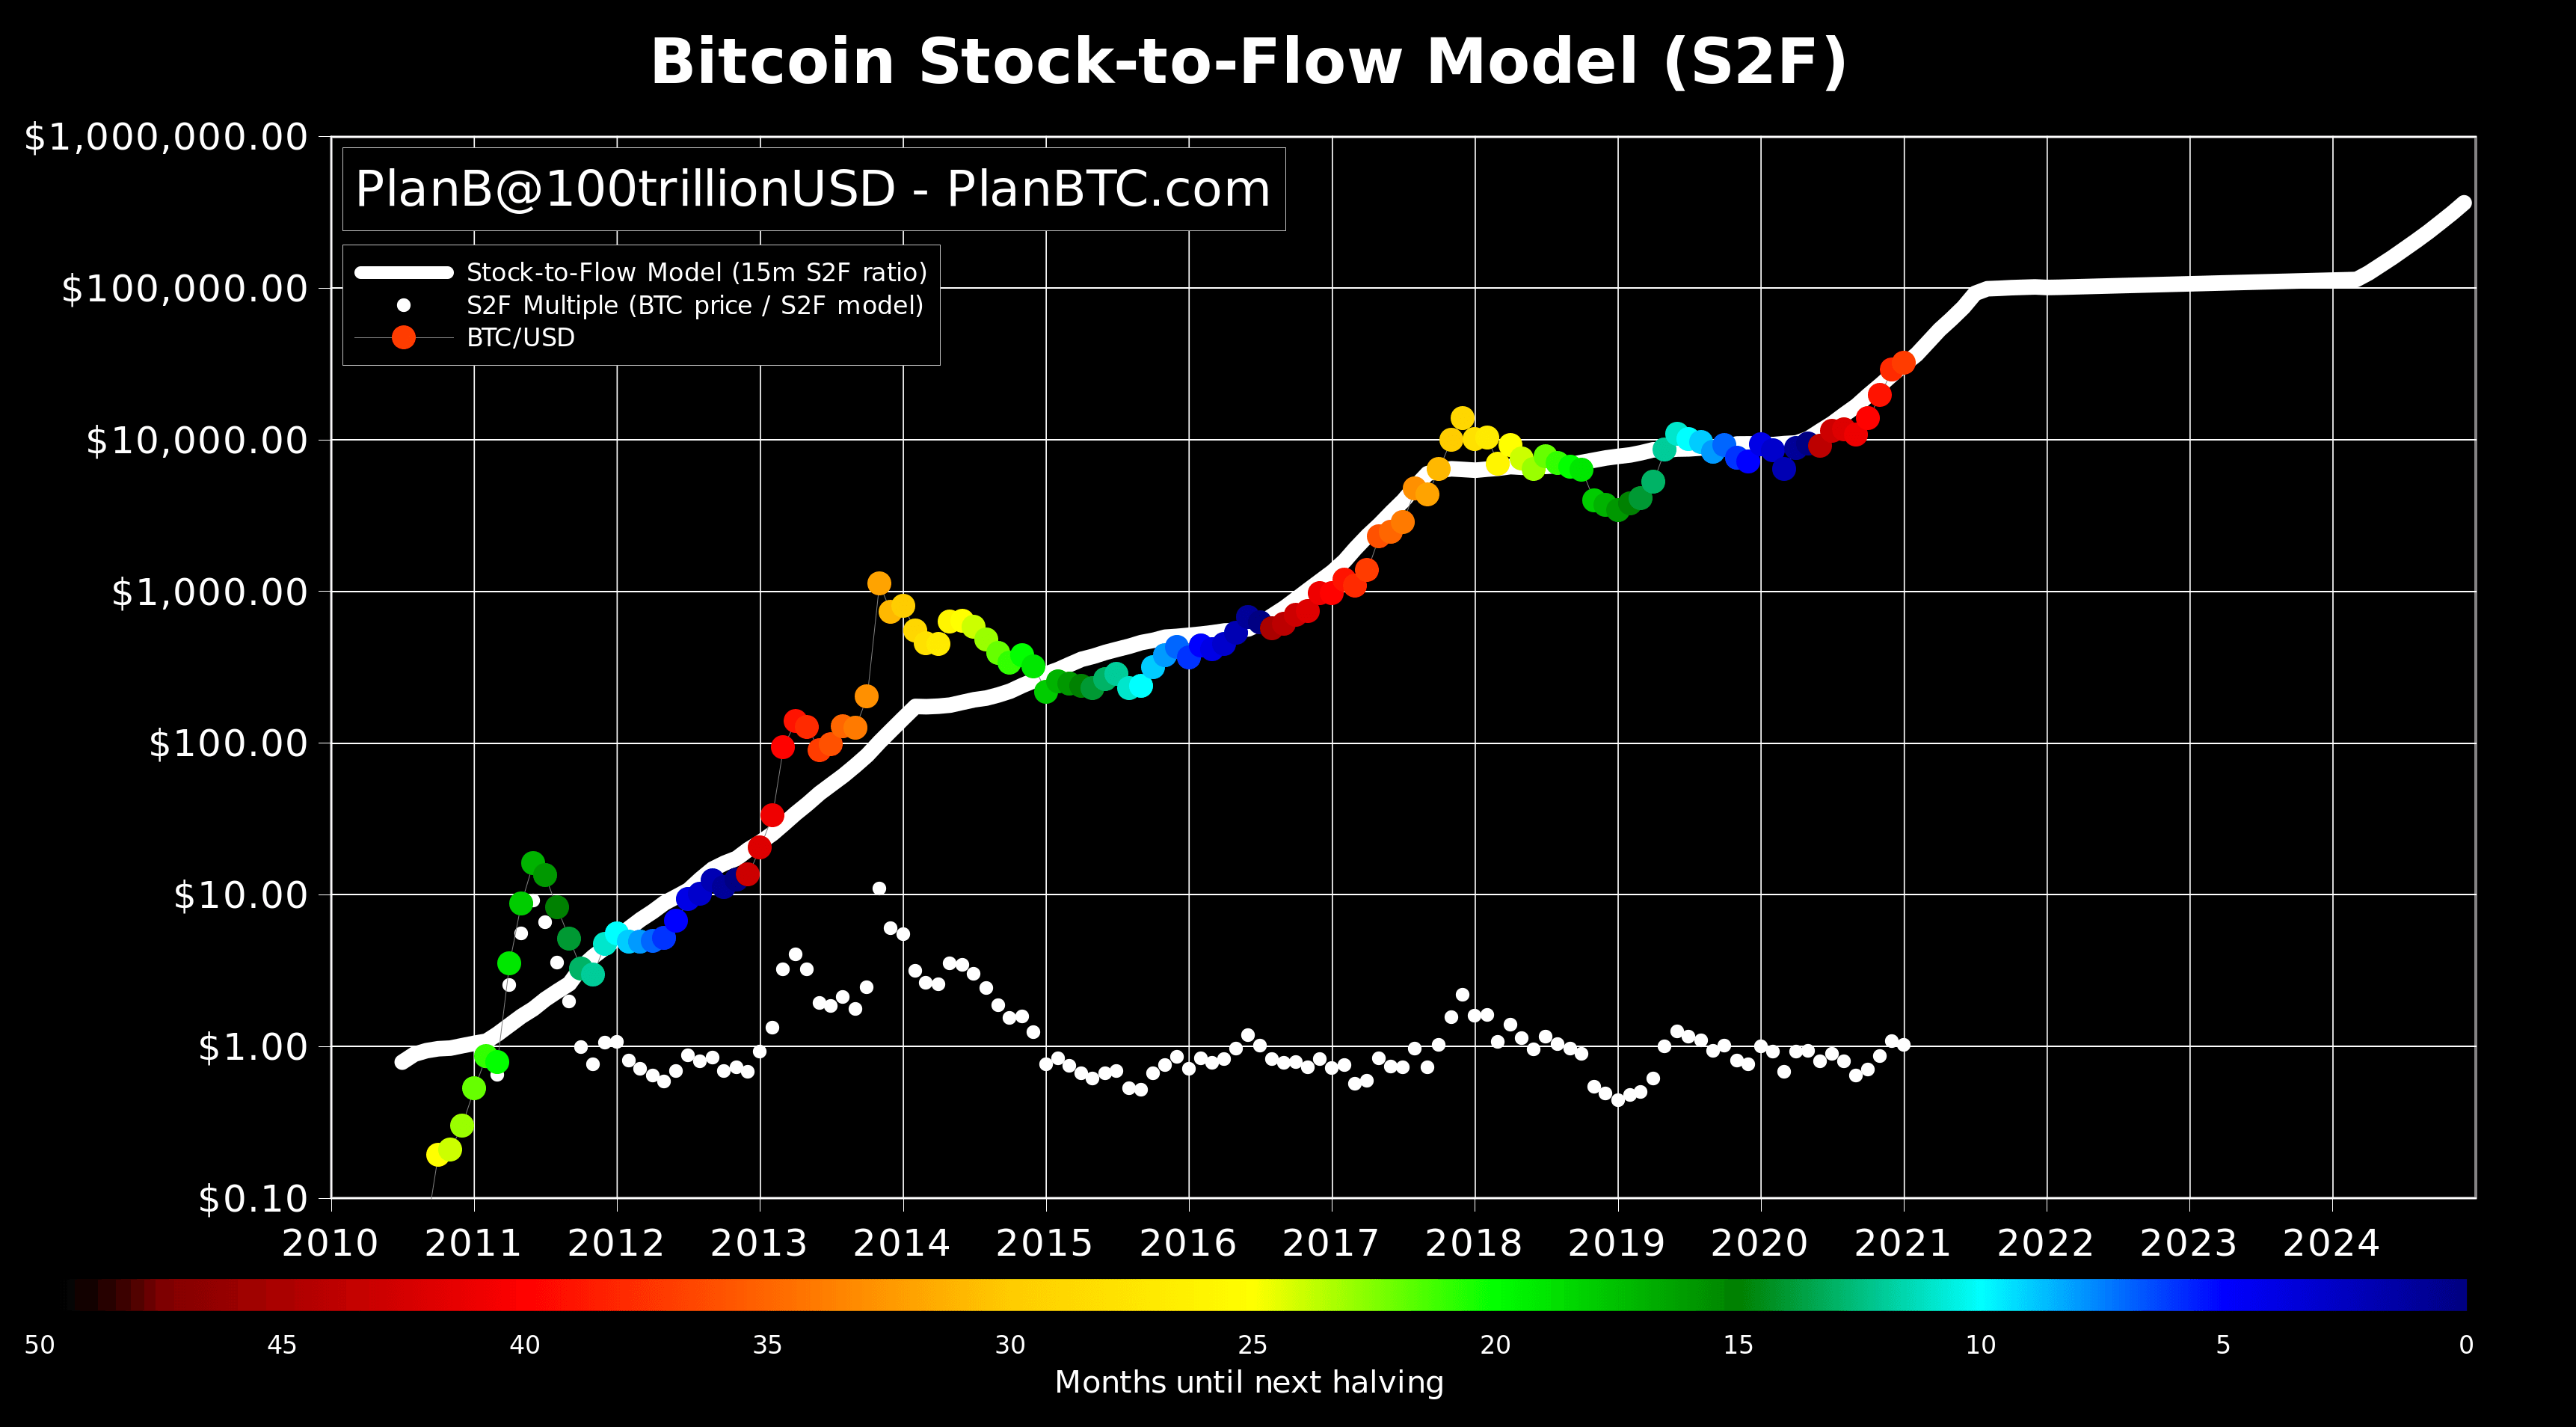 btc projected value